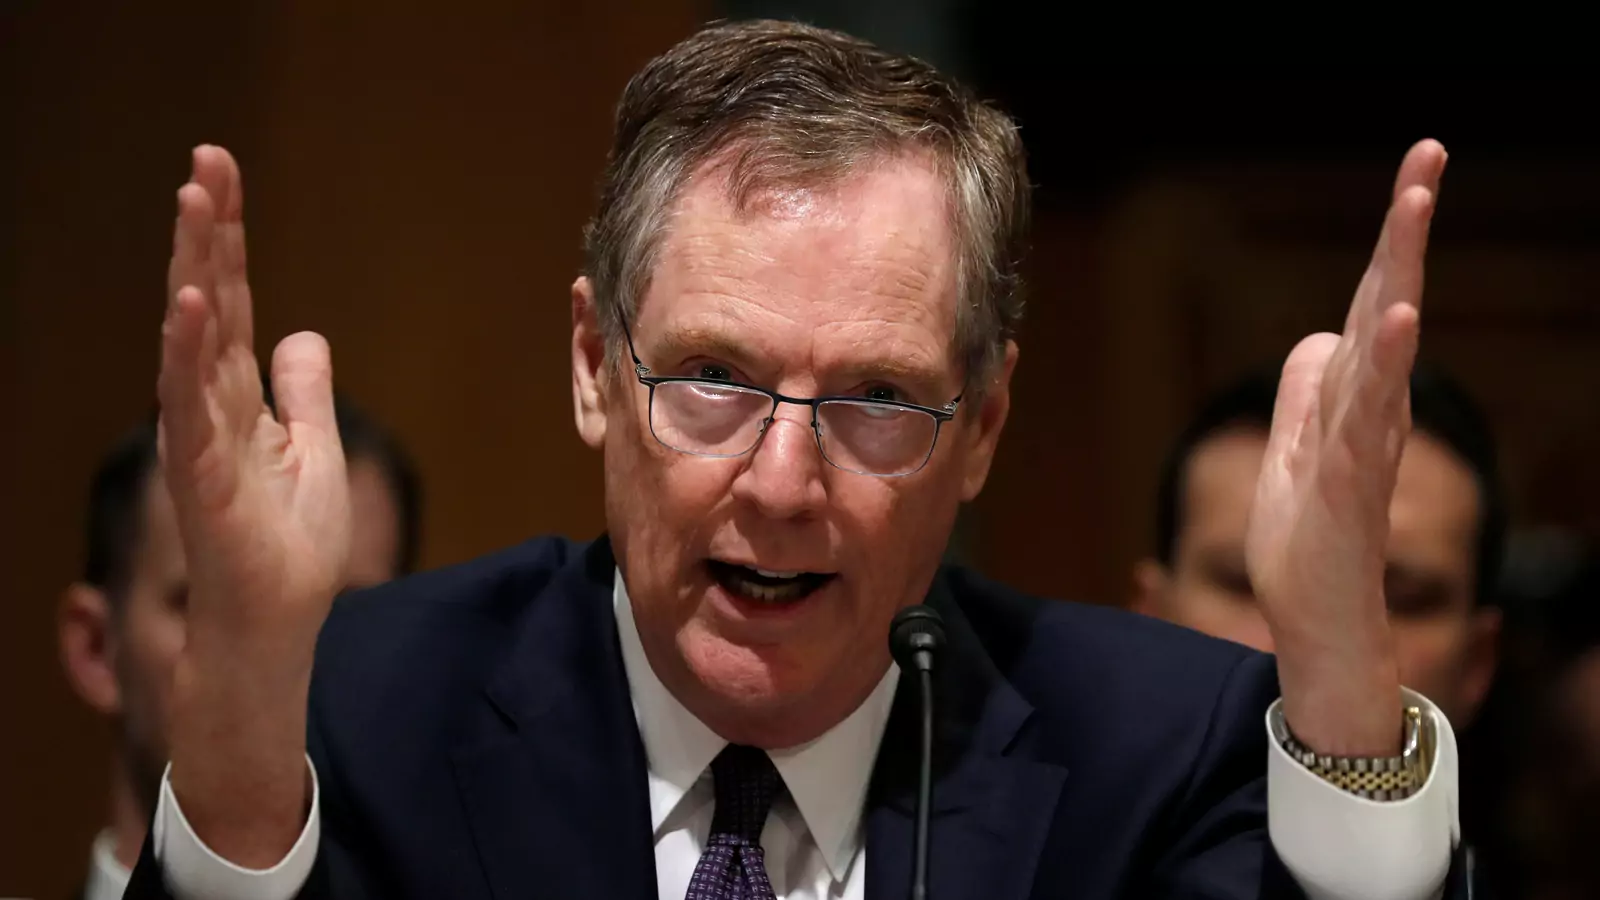 U.S. Trade Representative Robert Lighthizer testifies before a Senate Finance Committee hearing on "President Trump's 2018 Trade Policy Agenda" on Capitol Hill in Washington, U.S., March 22, 2018.